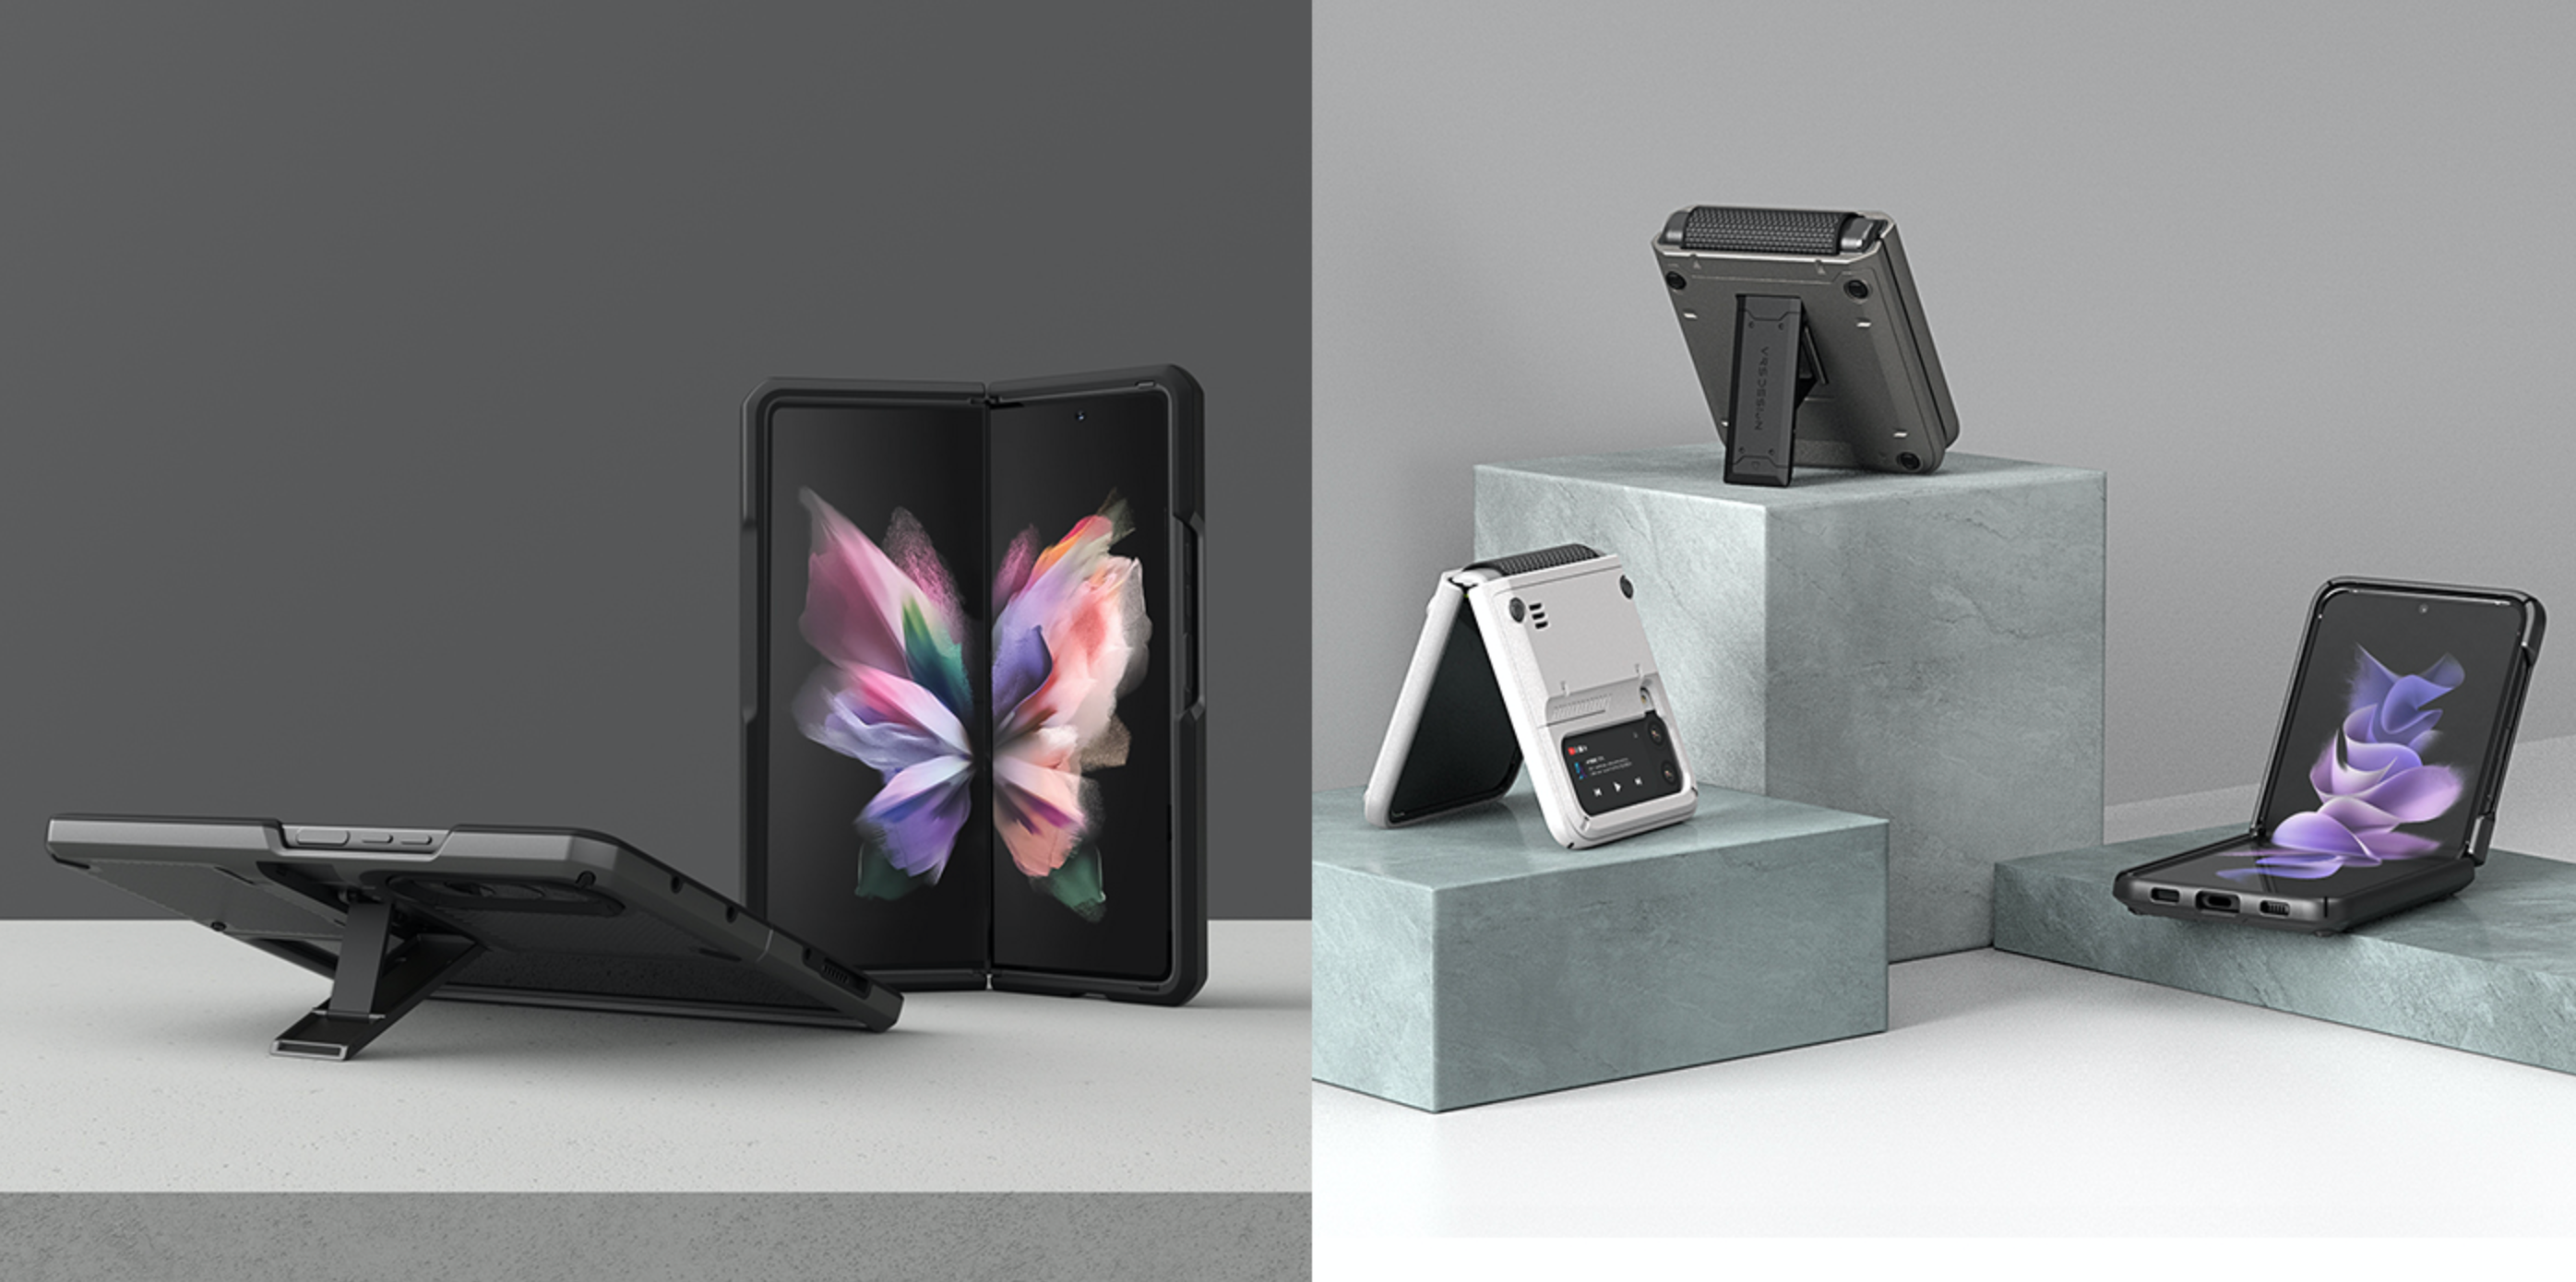 Update] Introducing Samsung Galaxy Z Flip4 and Galaxy Z Fold4: The